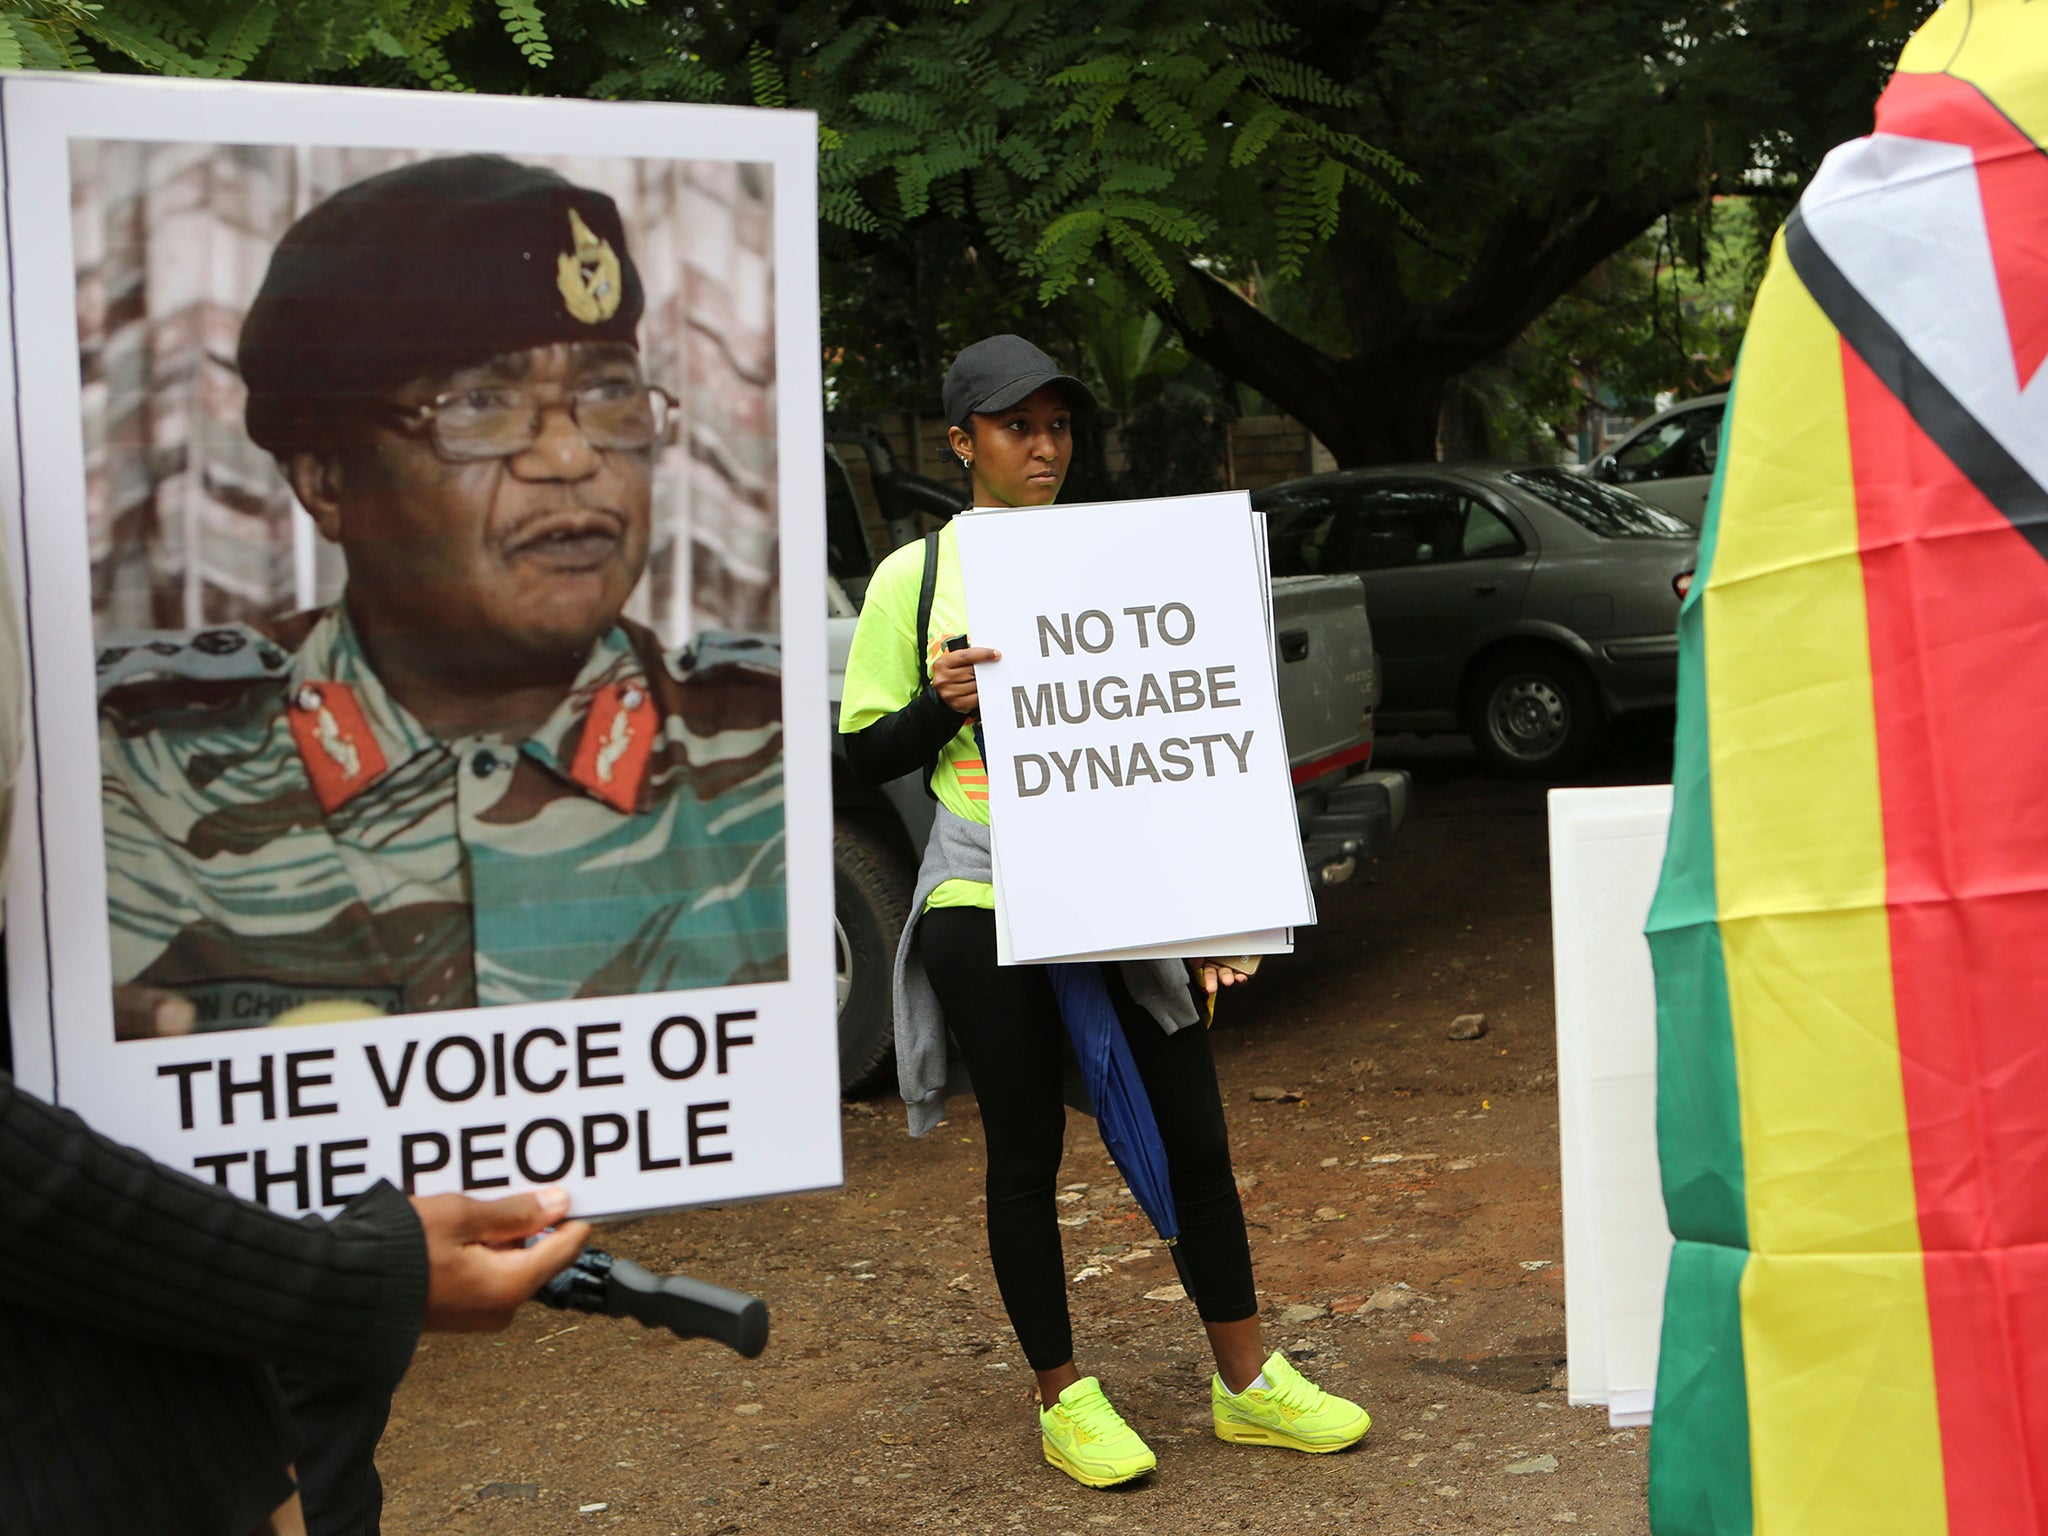 Protesters call on Zimbabwe’s now largely powerless President to resign